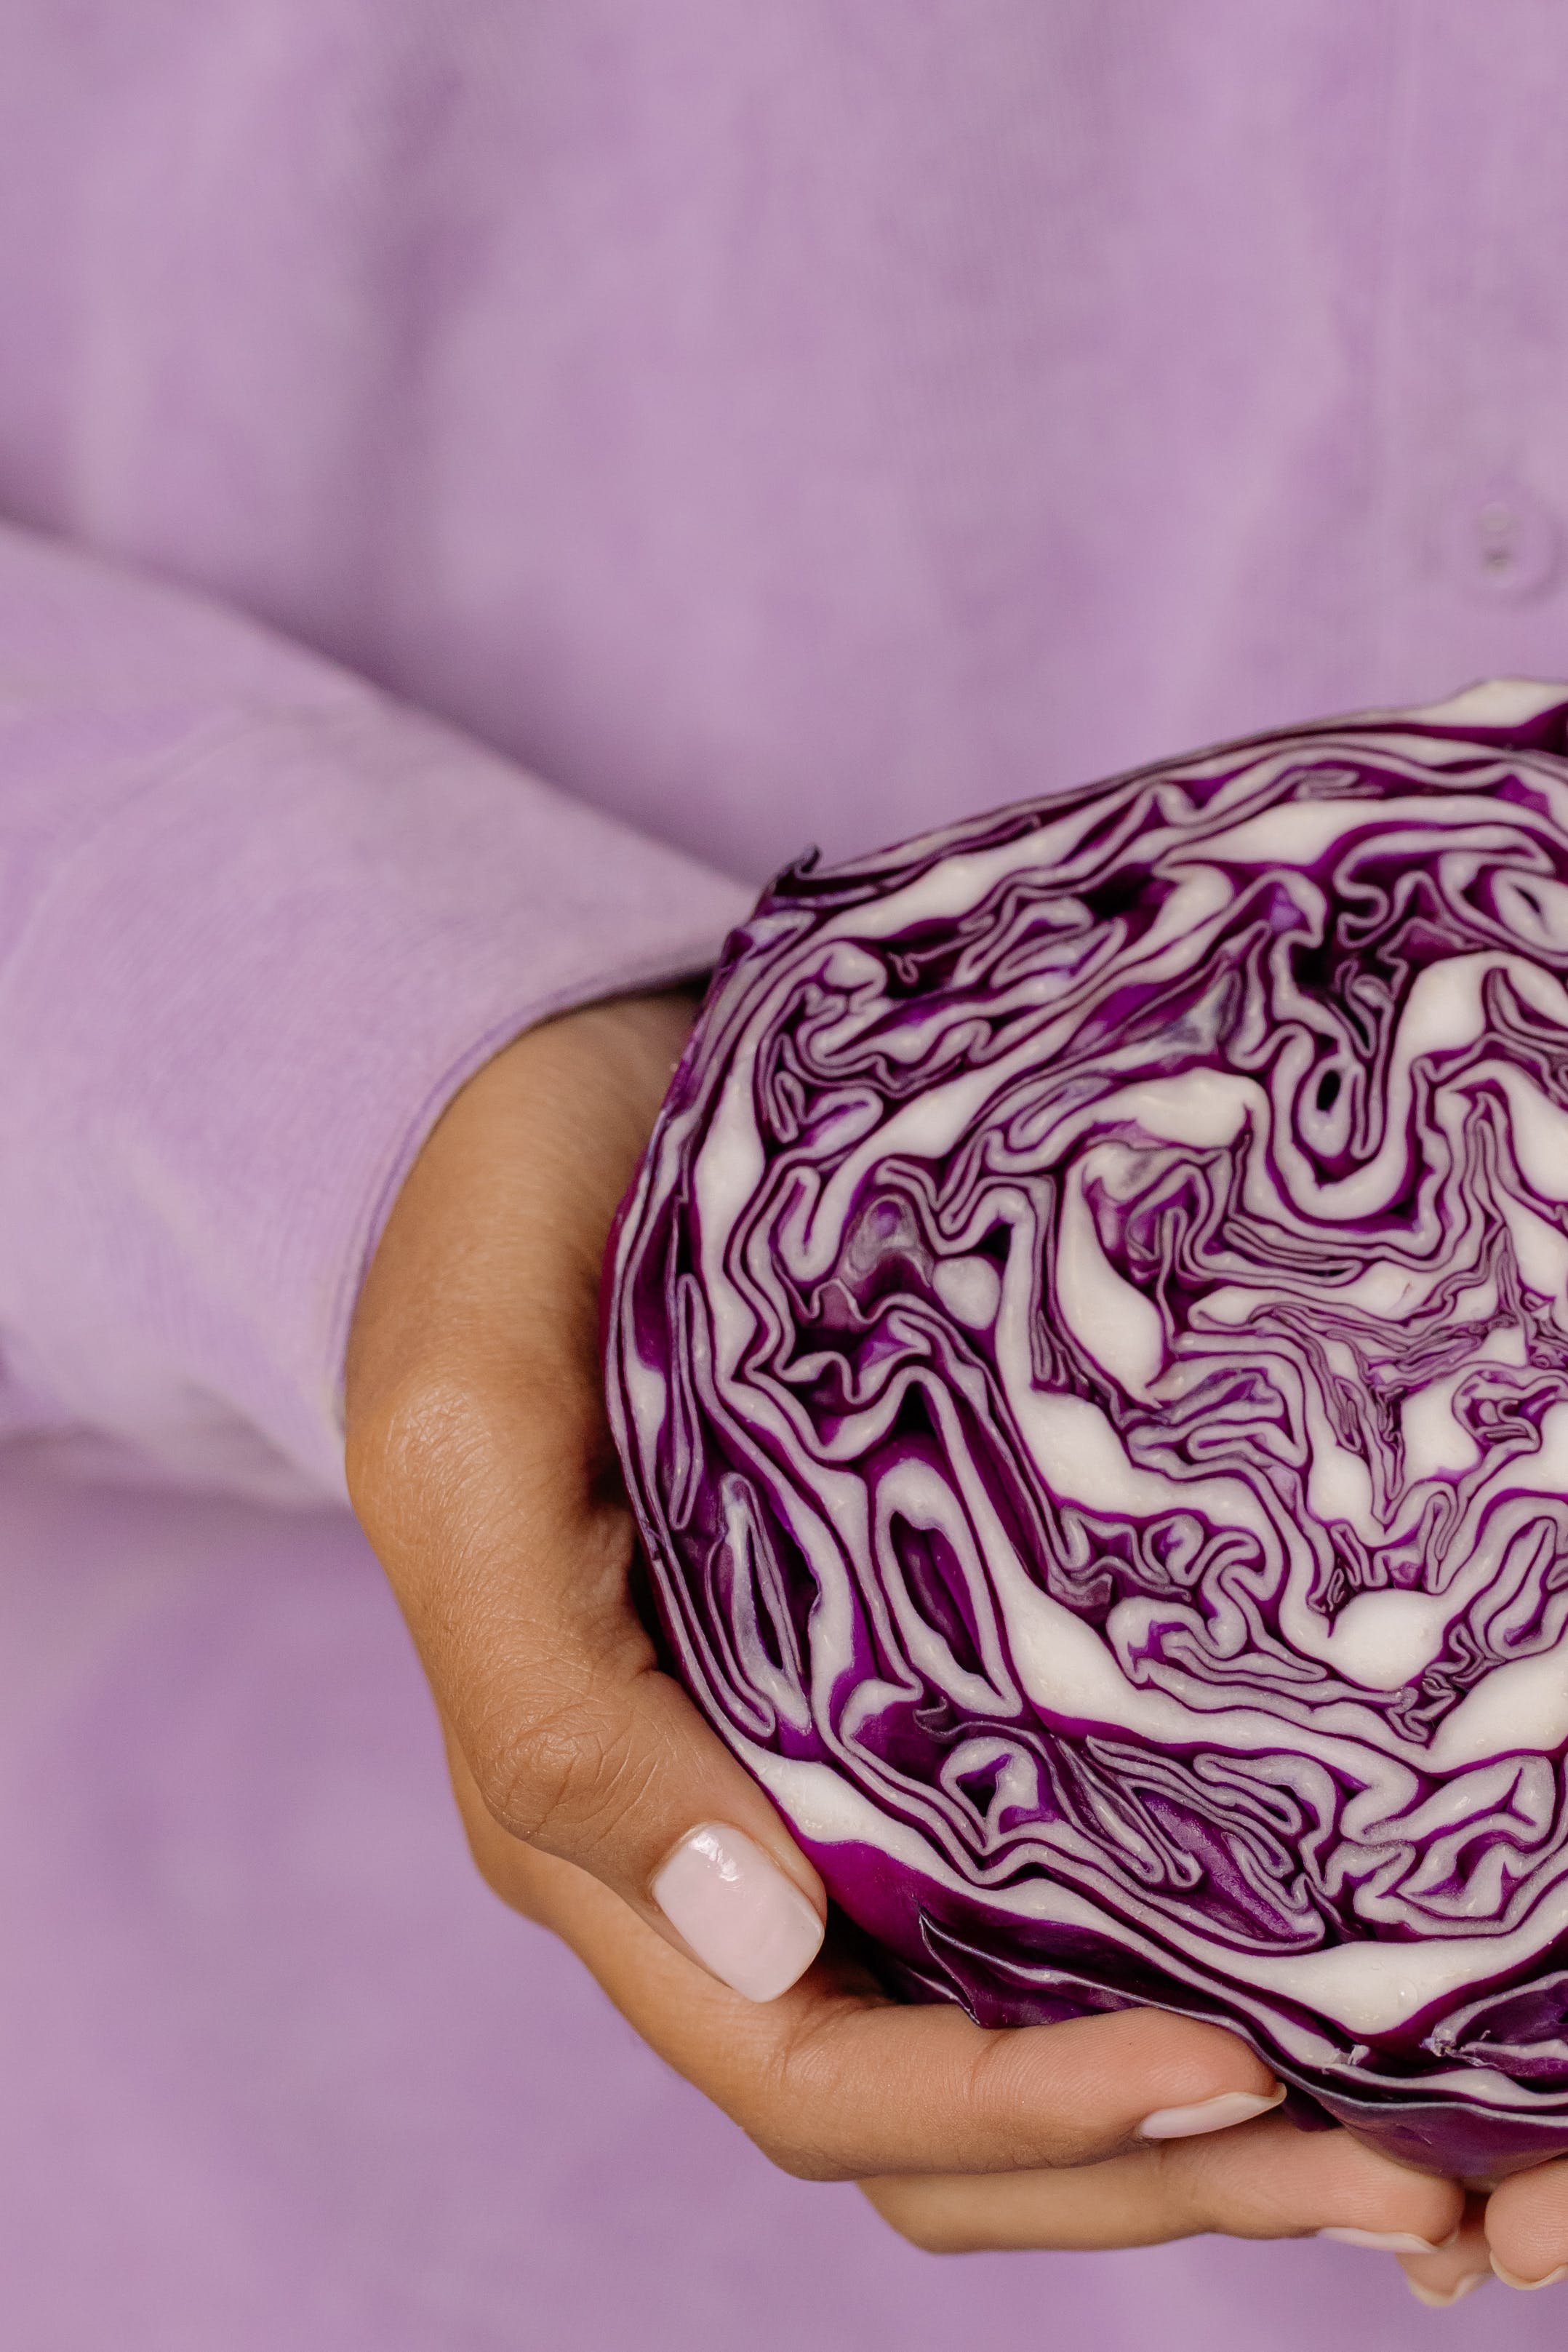 Red cabbage | Source: Pexels